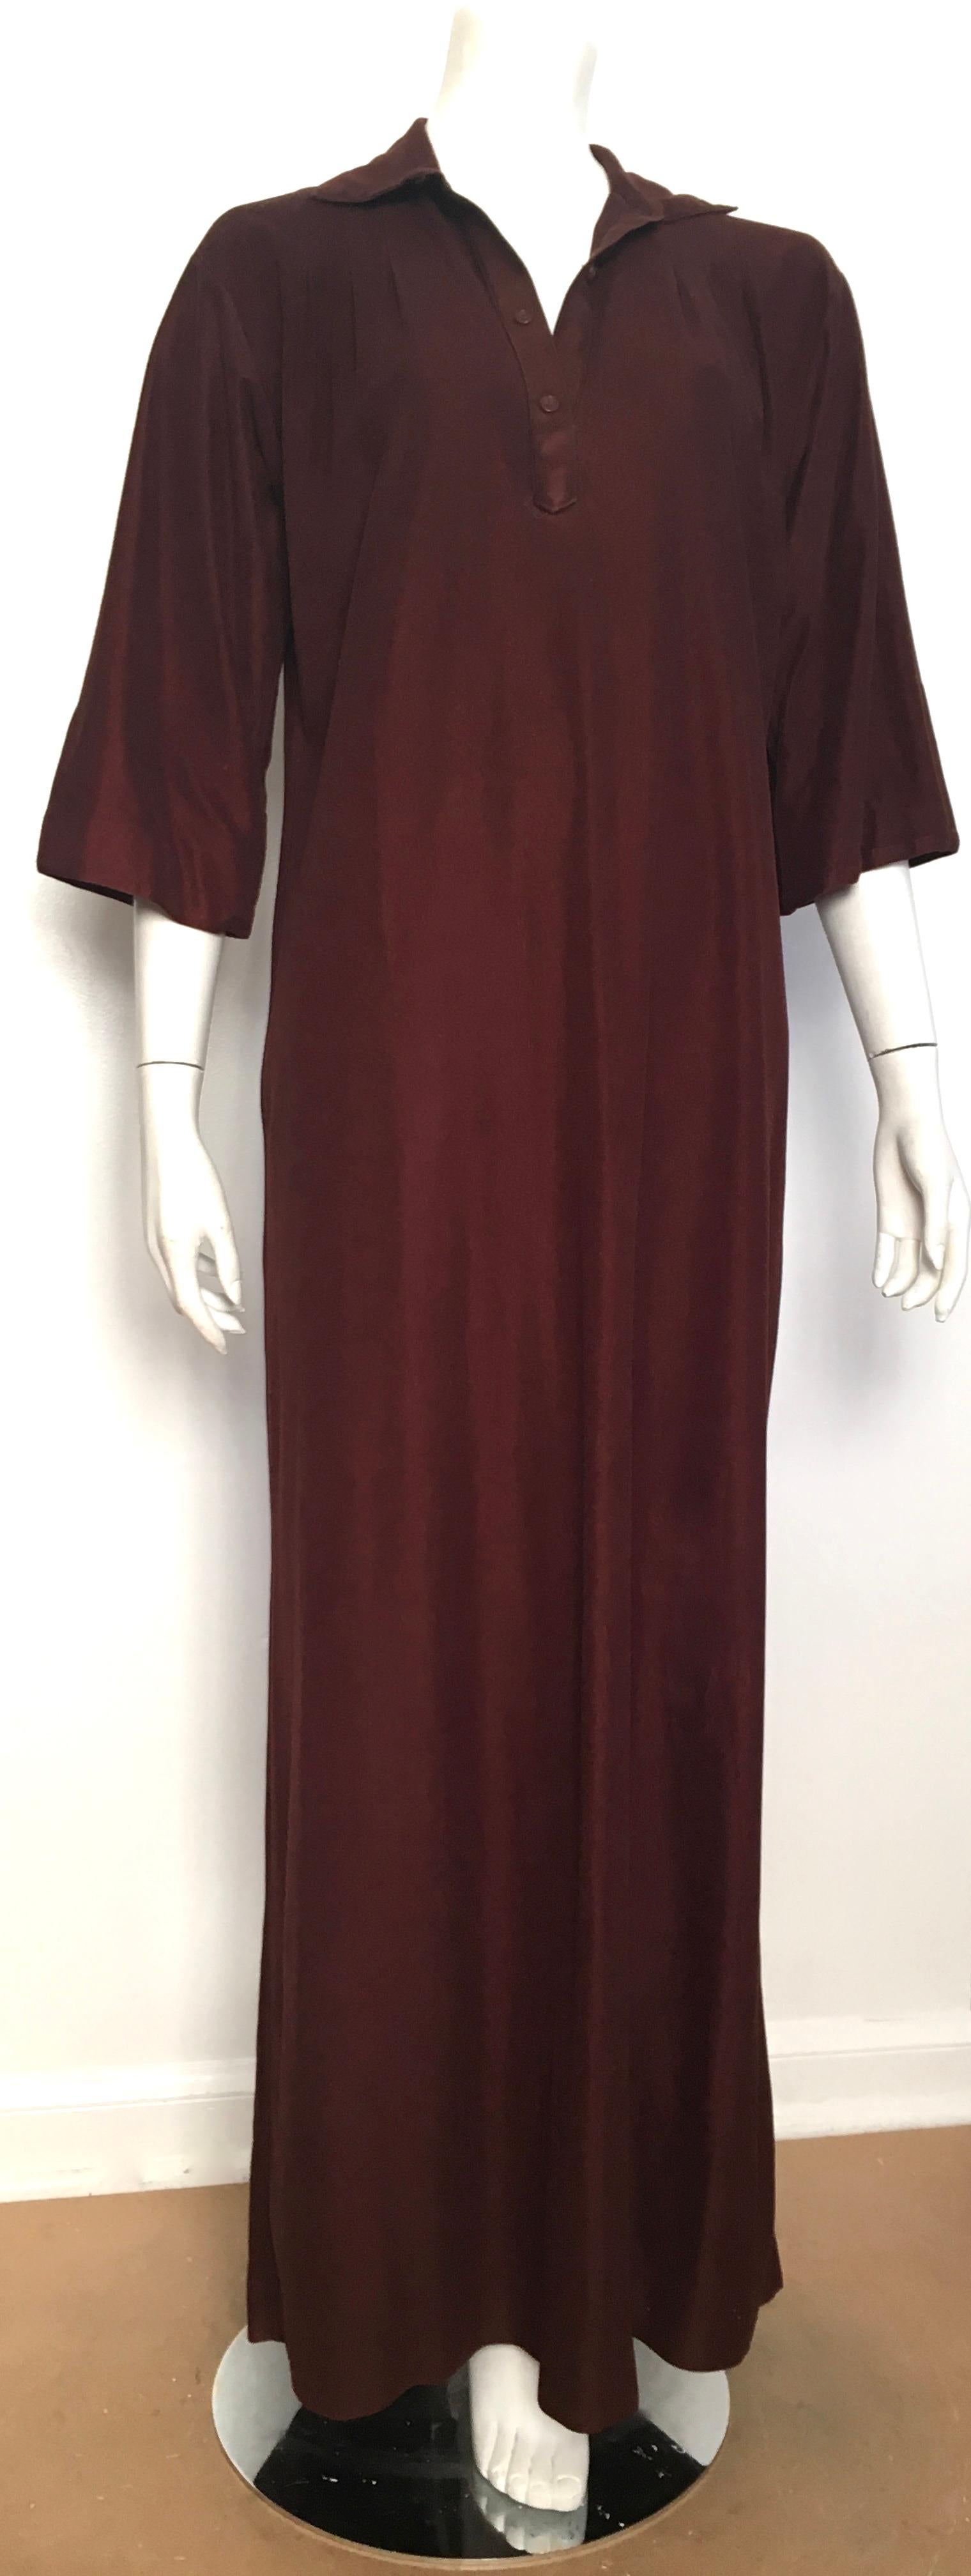 Geoffrey Beene for Swirl 1978 brown maxi caftan / loungewear with pockets will fit a US size 6 / 8 beautifully.  Matilda the Mannequin is a size 4 and she looks amazing in this Geoffrey Beene piece.  This is supposed to be flowing, loose, unconfined